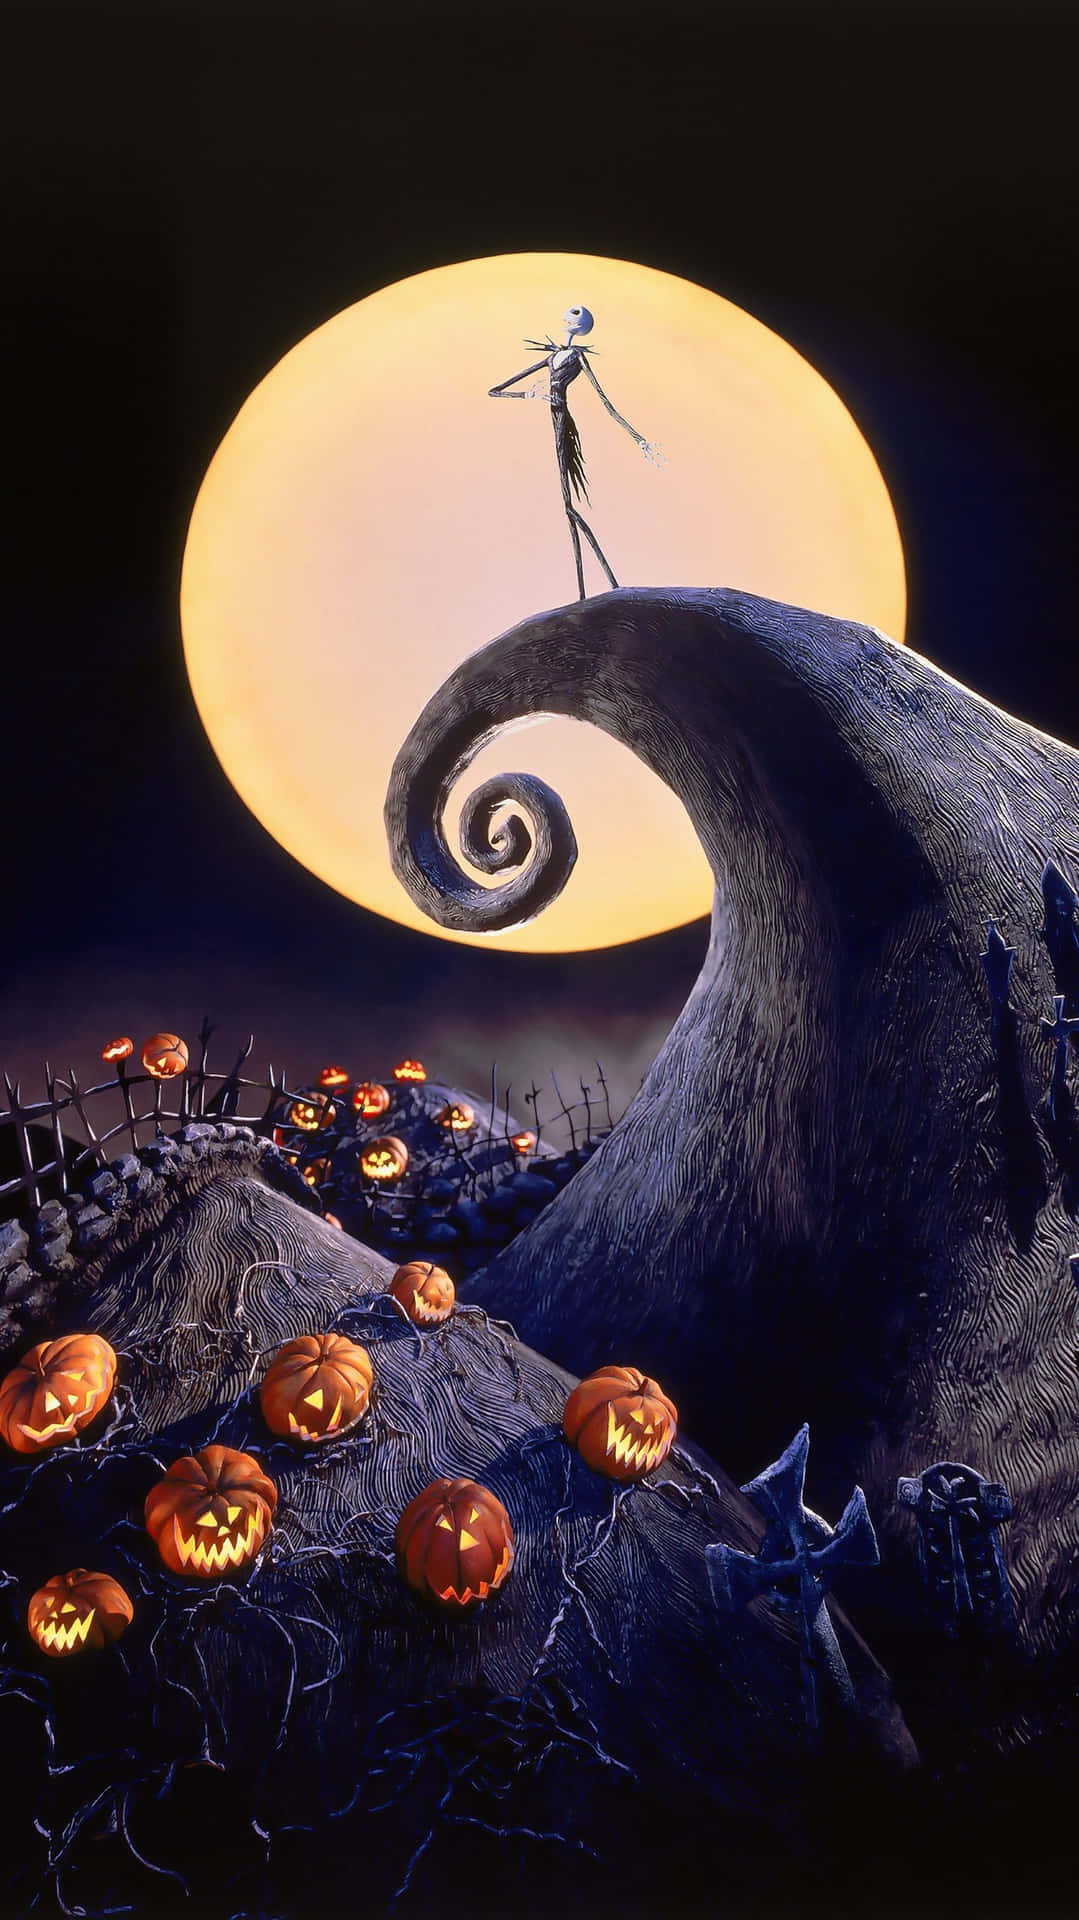 Get in the Mood with a Nightmare Before Christmas Phone Wallpaper